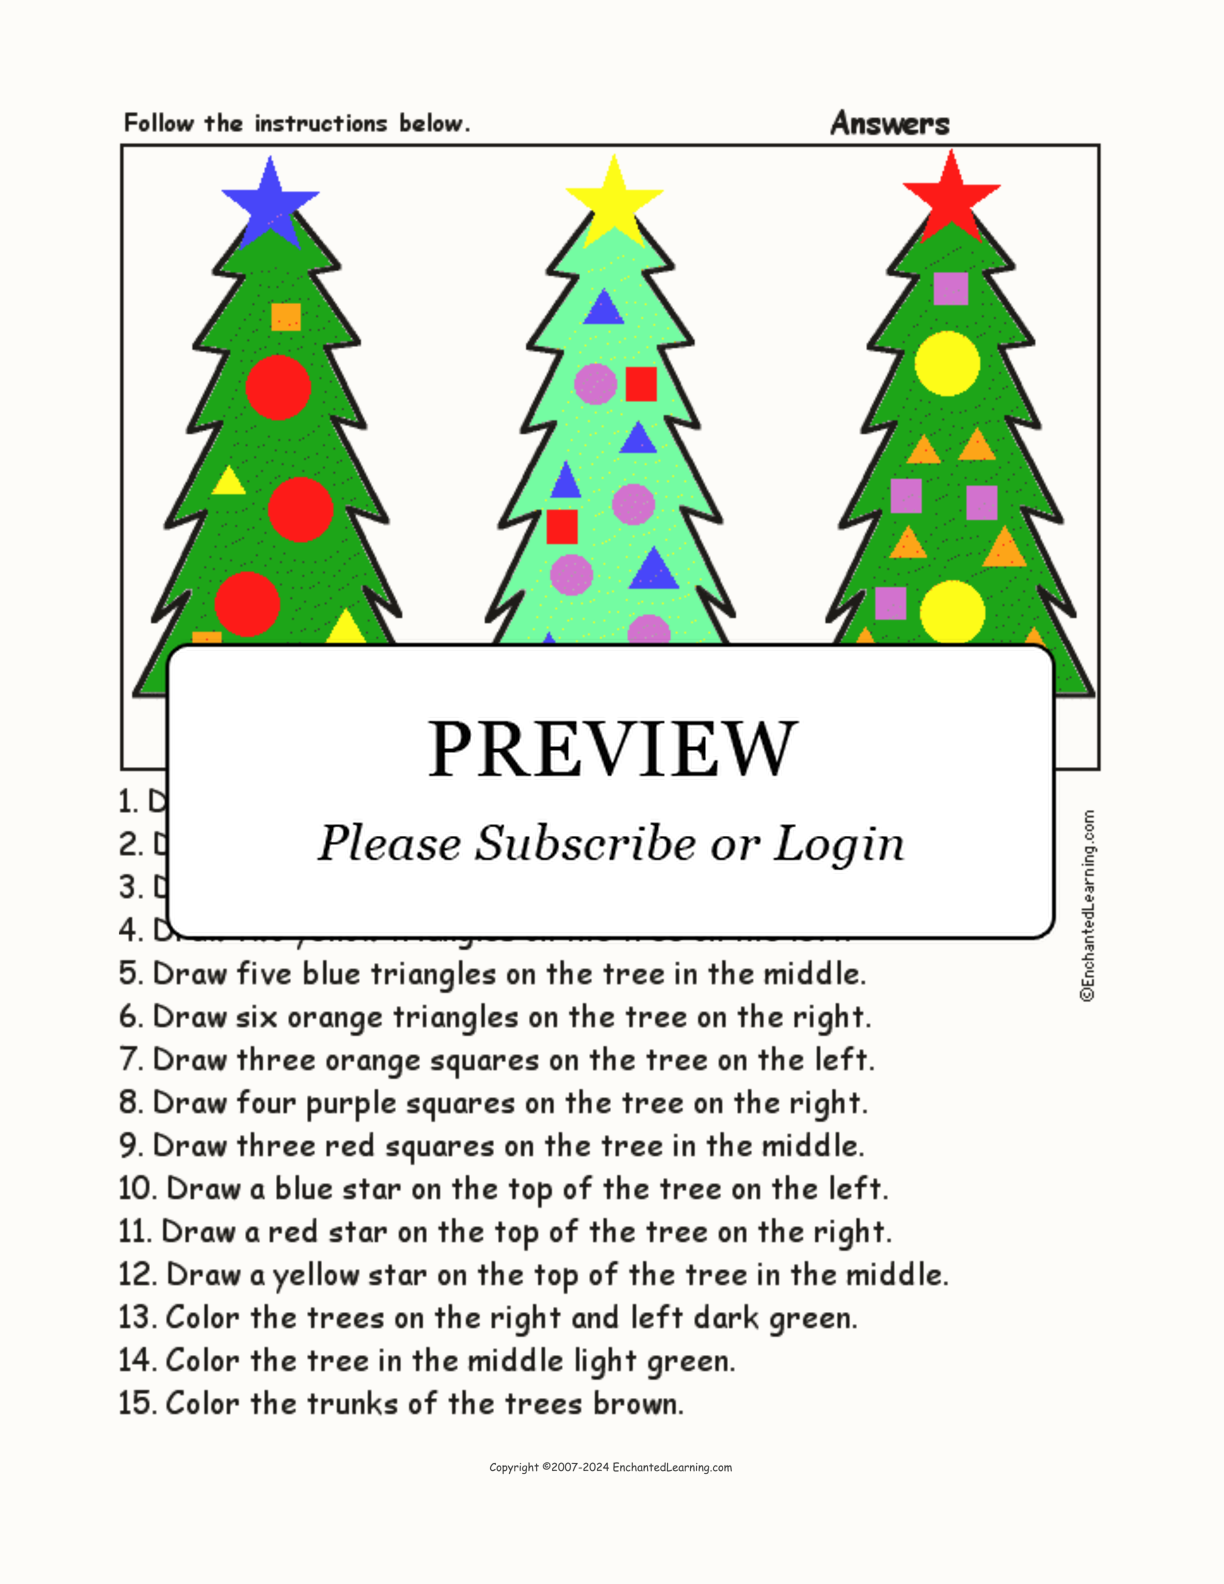 Evergreen Trees - Follow the Instructions interactive worksheet page 2